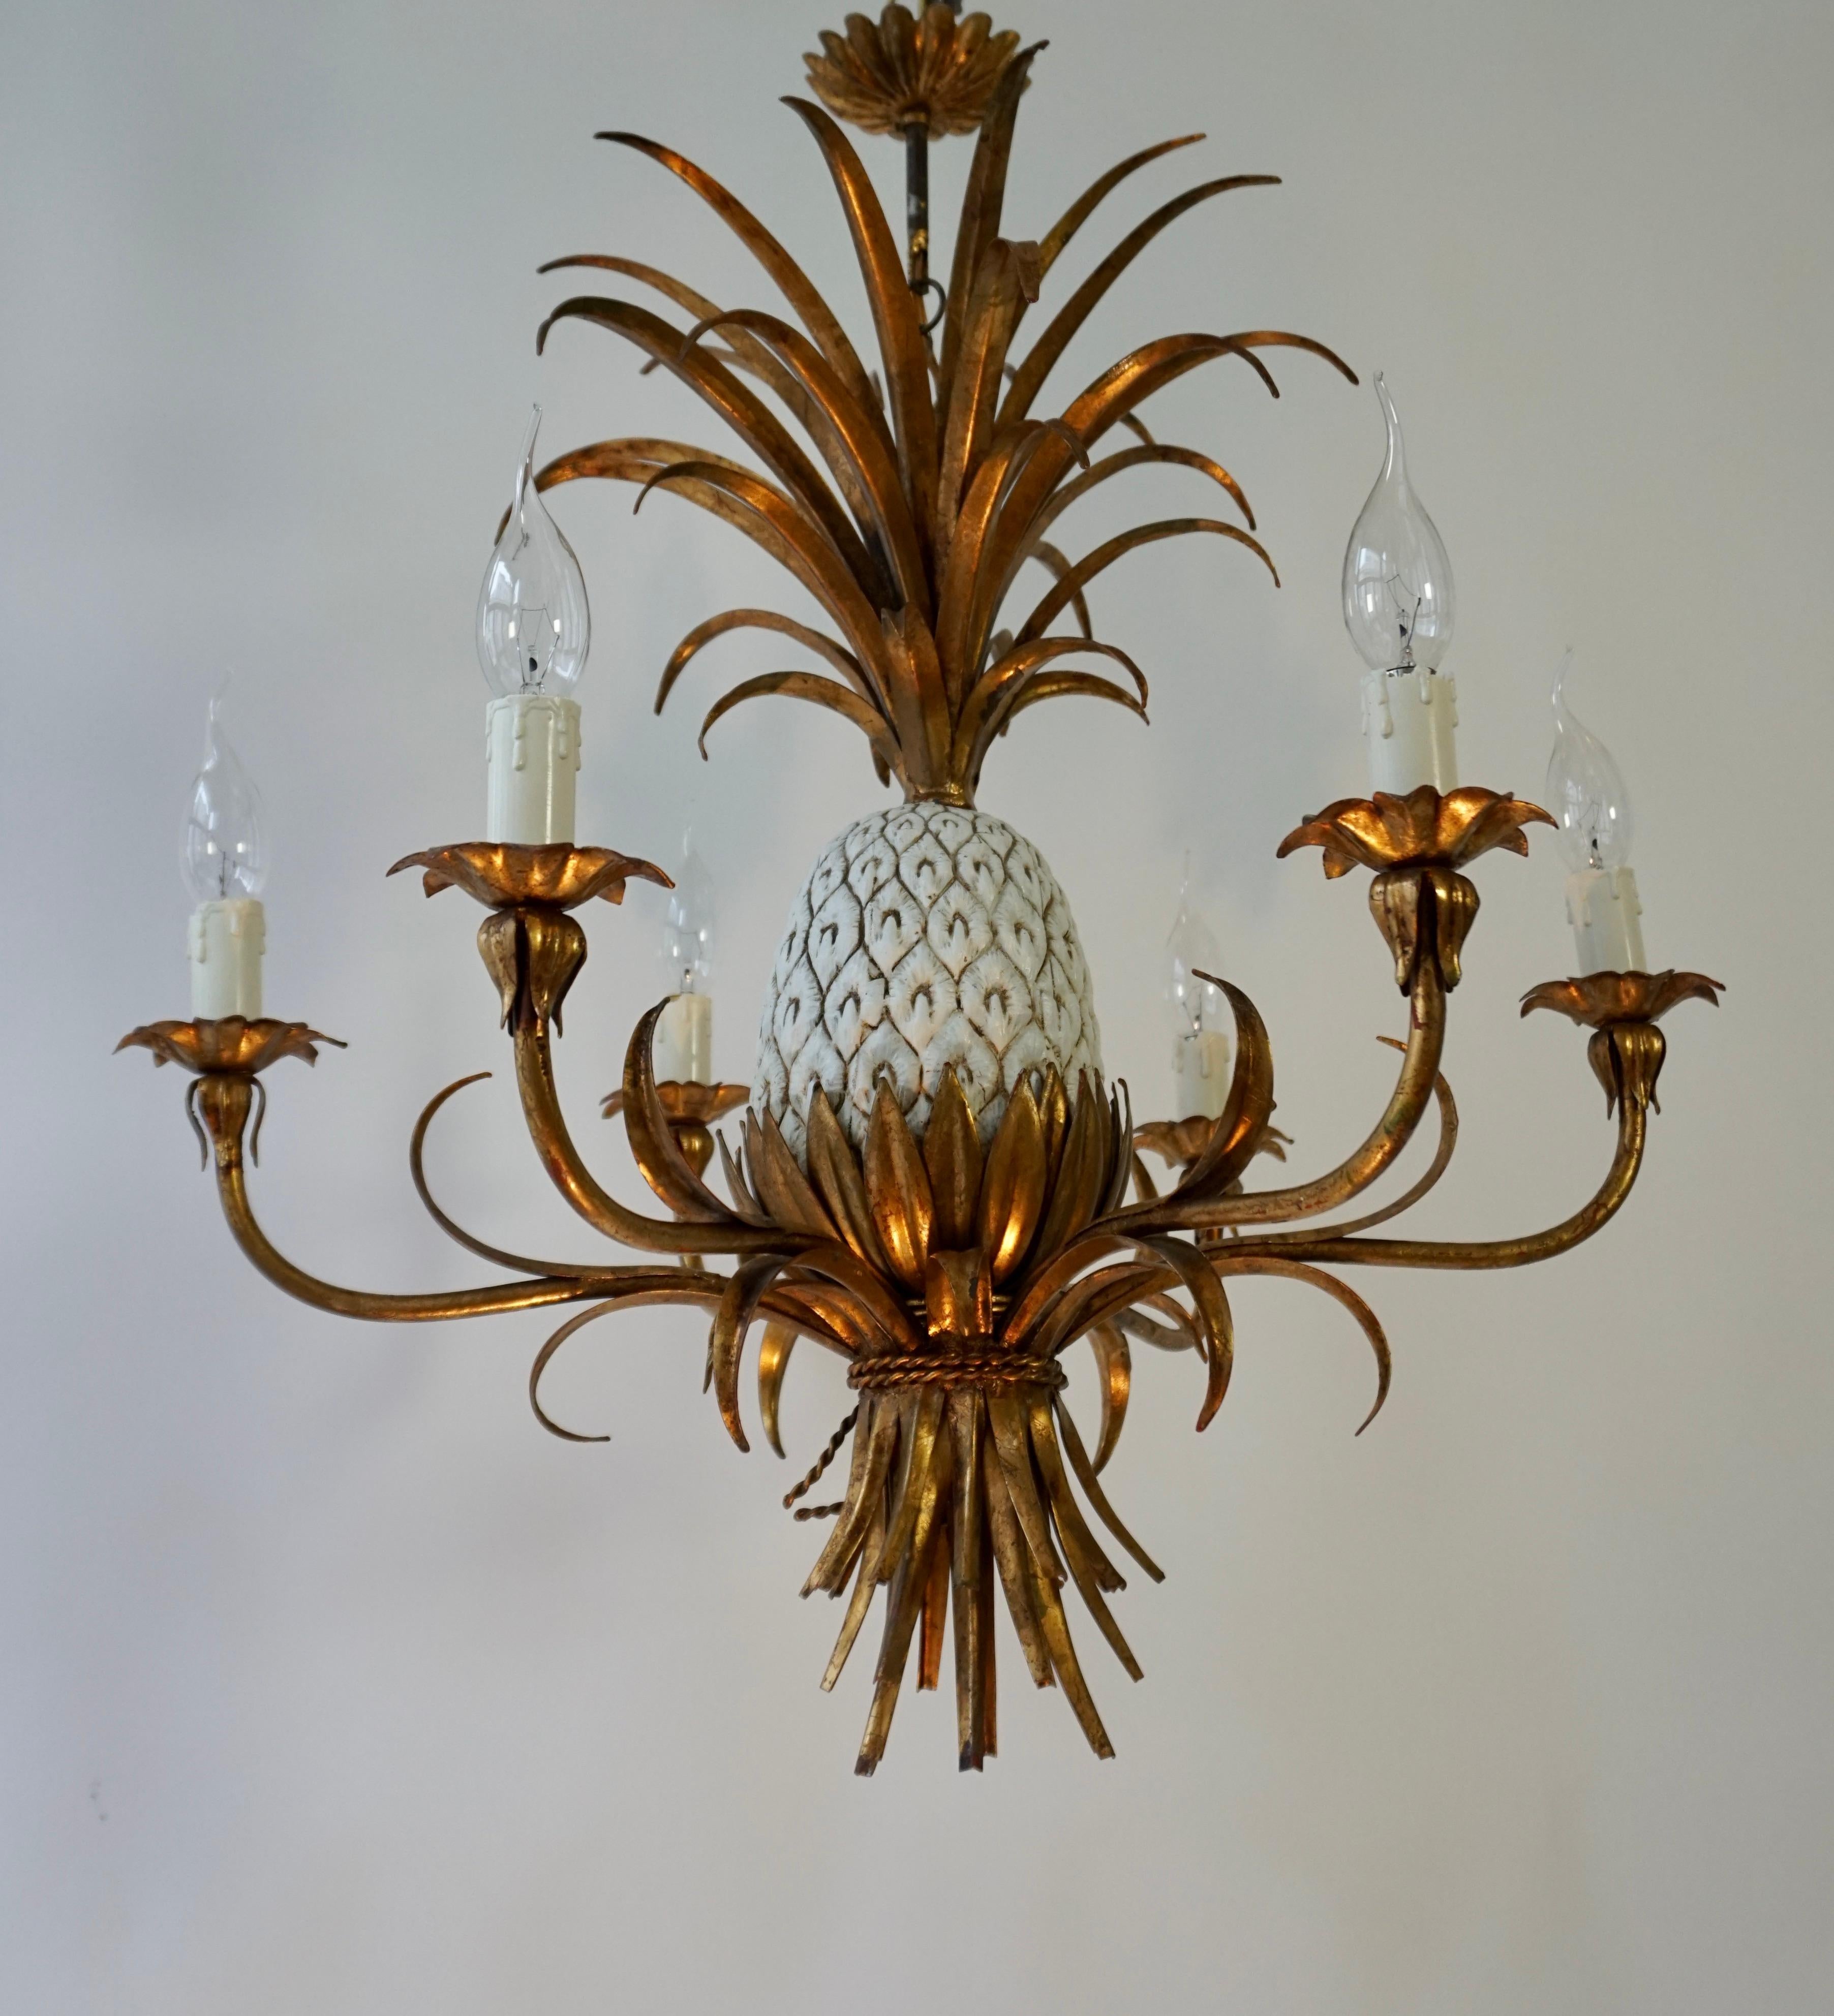 Beautiful ceramic pineapple chandelier with gilt acanthus leaf details and gilt fronds.

There are 6 arms each carrying a single lamp holder (e14) The chain leads to the original git ceiling rose.

Measures:70cm total height, 64 cm width, height